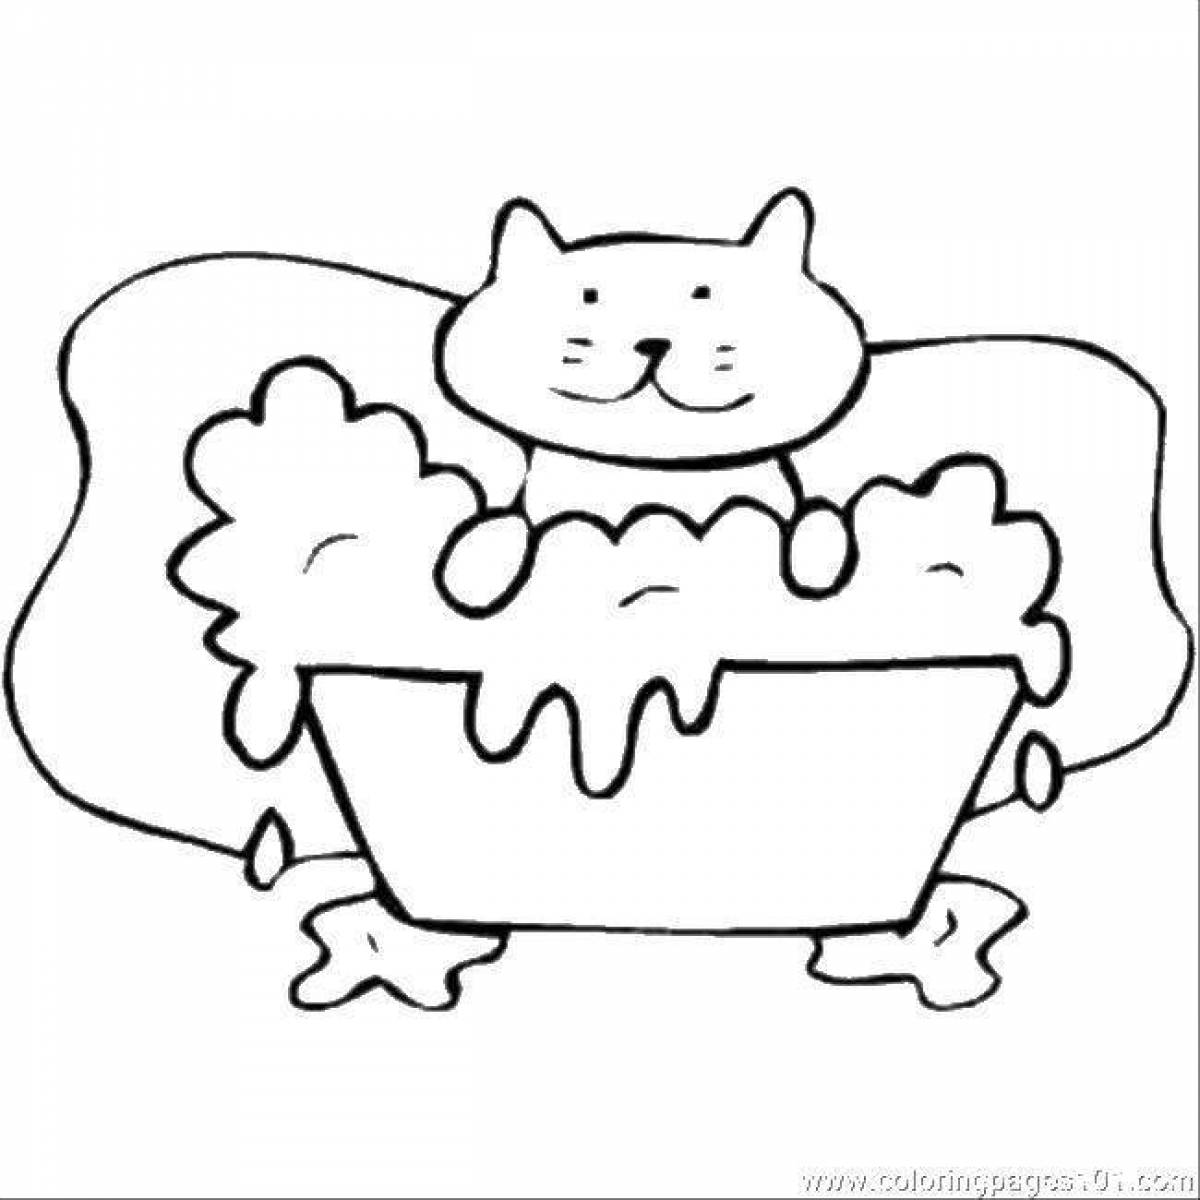 Coloring page serene cat in a mug